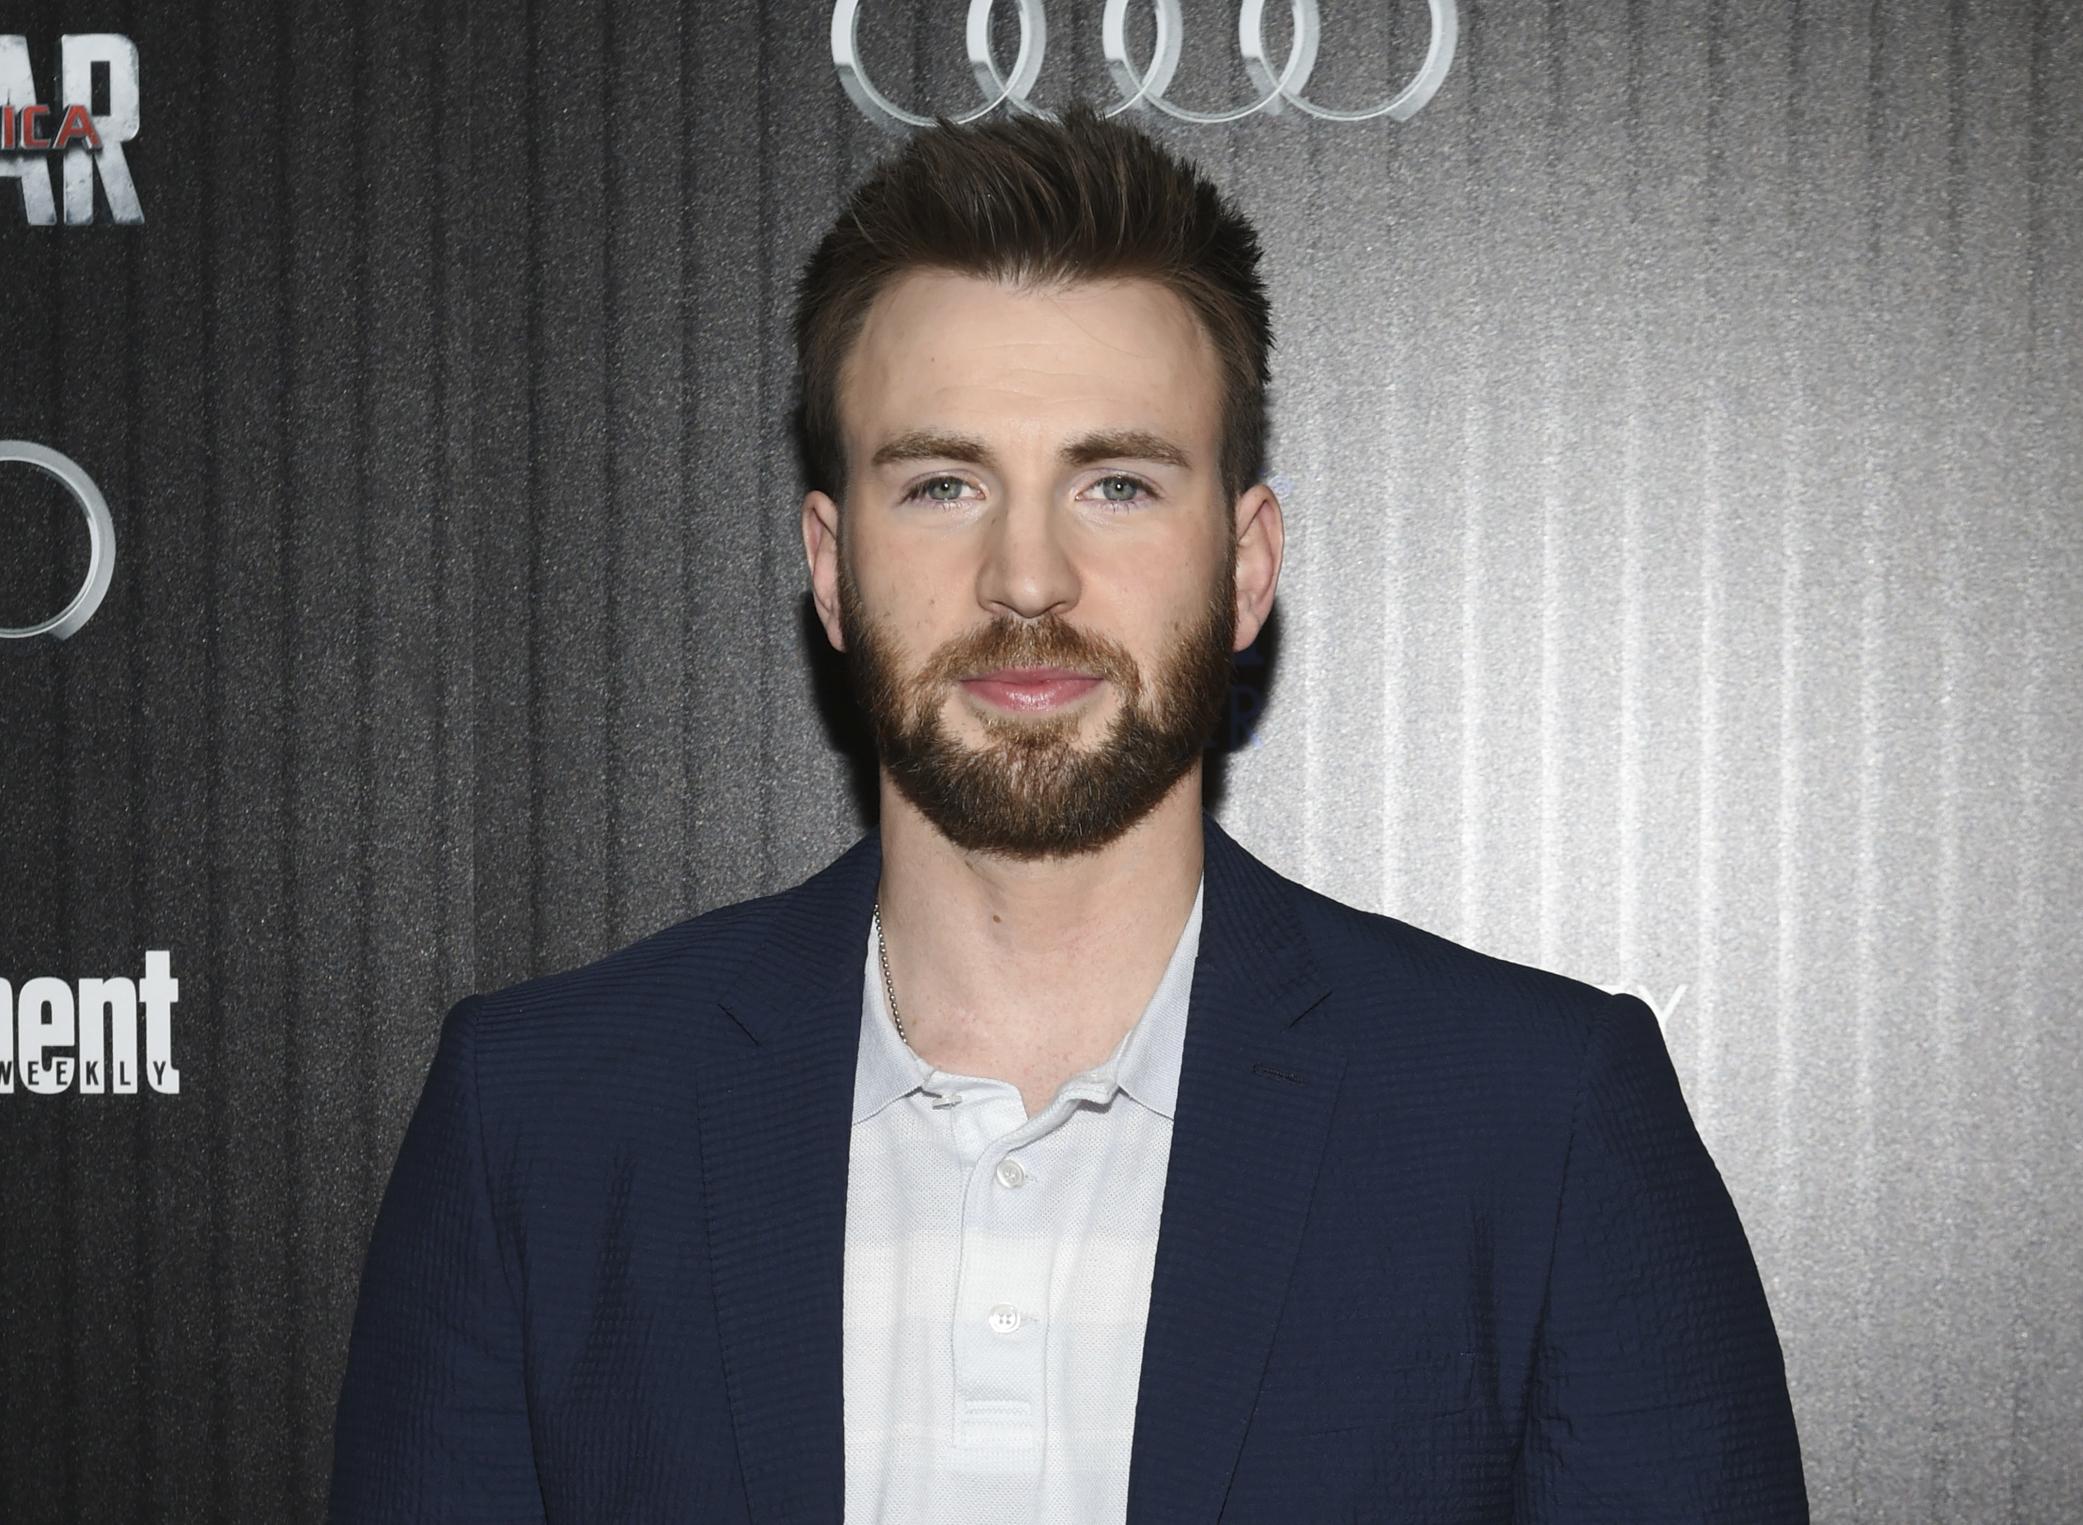 Did Chris Evans Get a Hair Transplant? Is He Going Bald? - Cosmeticium